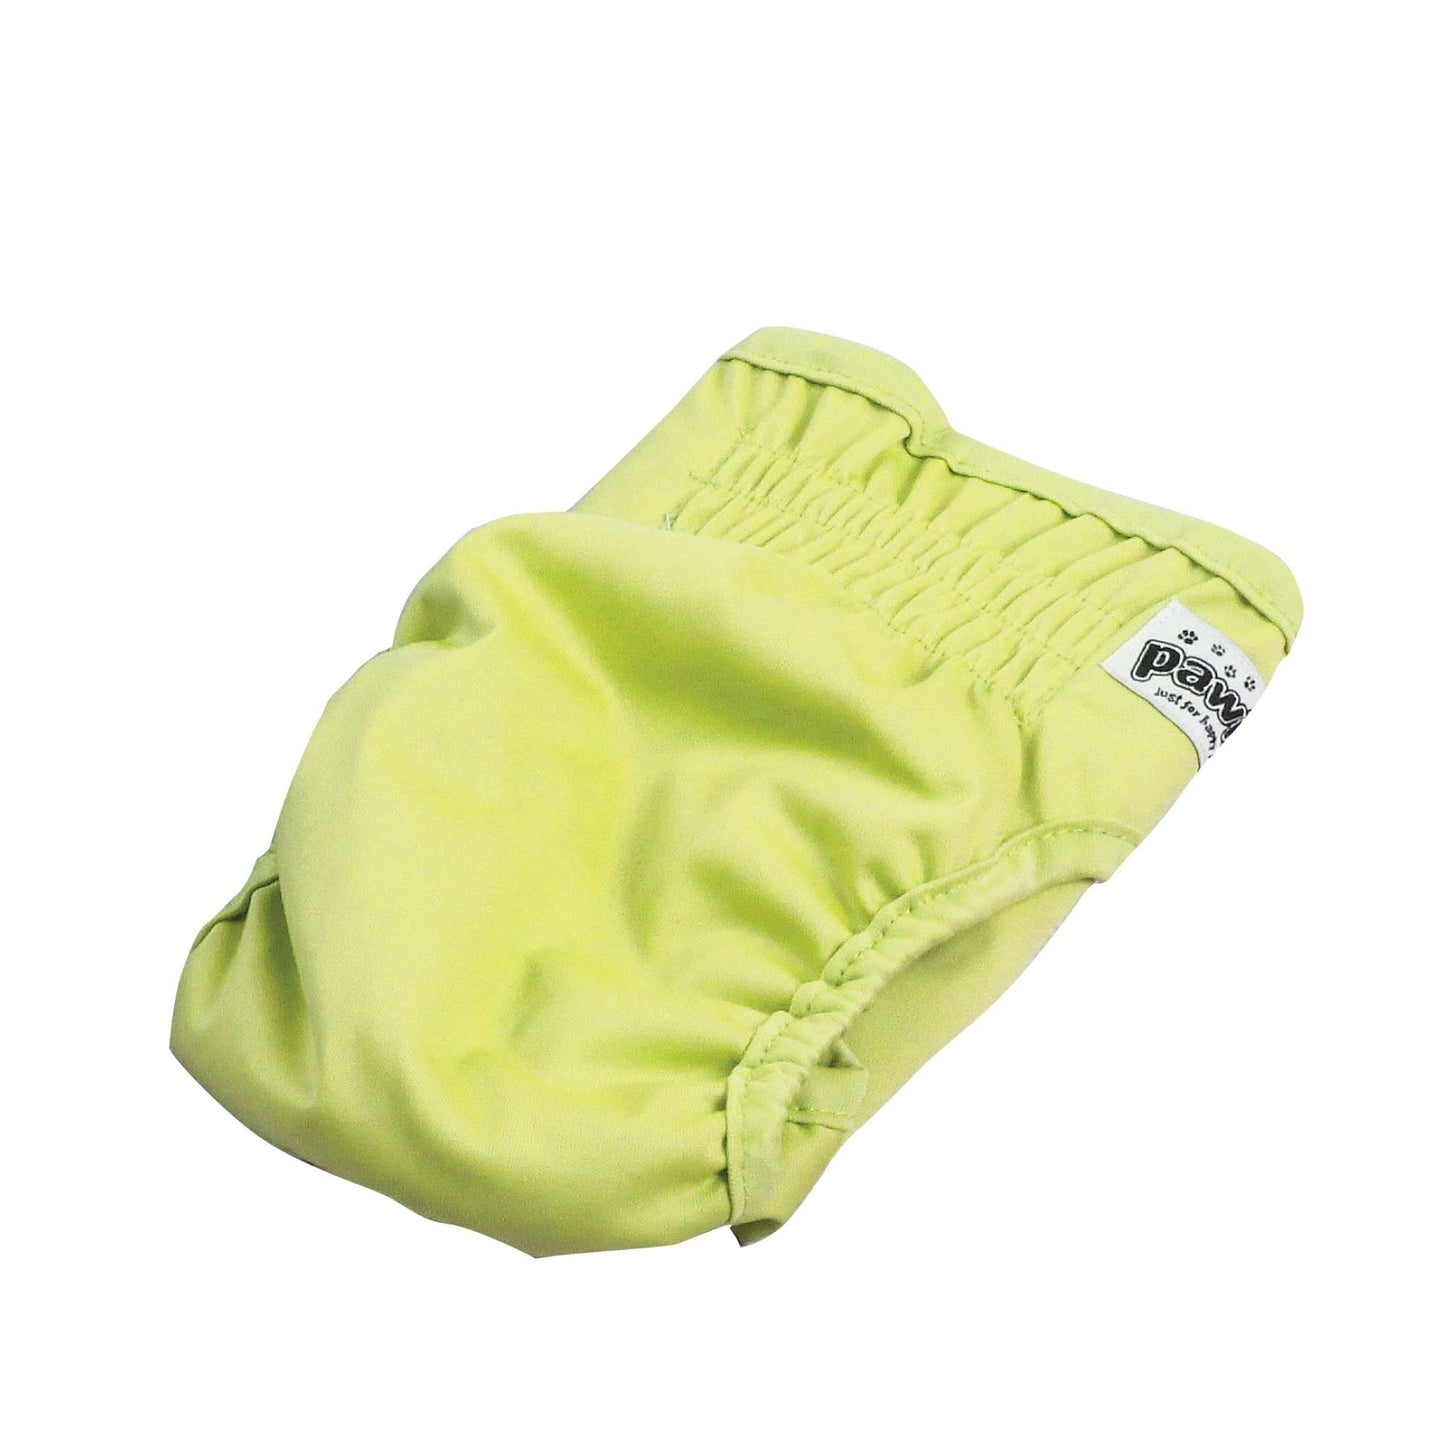 3 Pck Reusable Female Dog Diapers Puppy Nappy Eco Washable Period Incontinence Heat